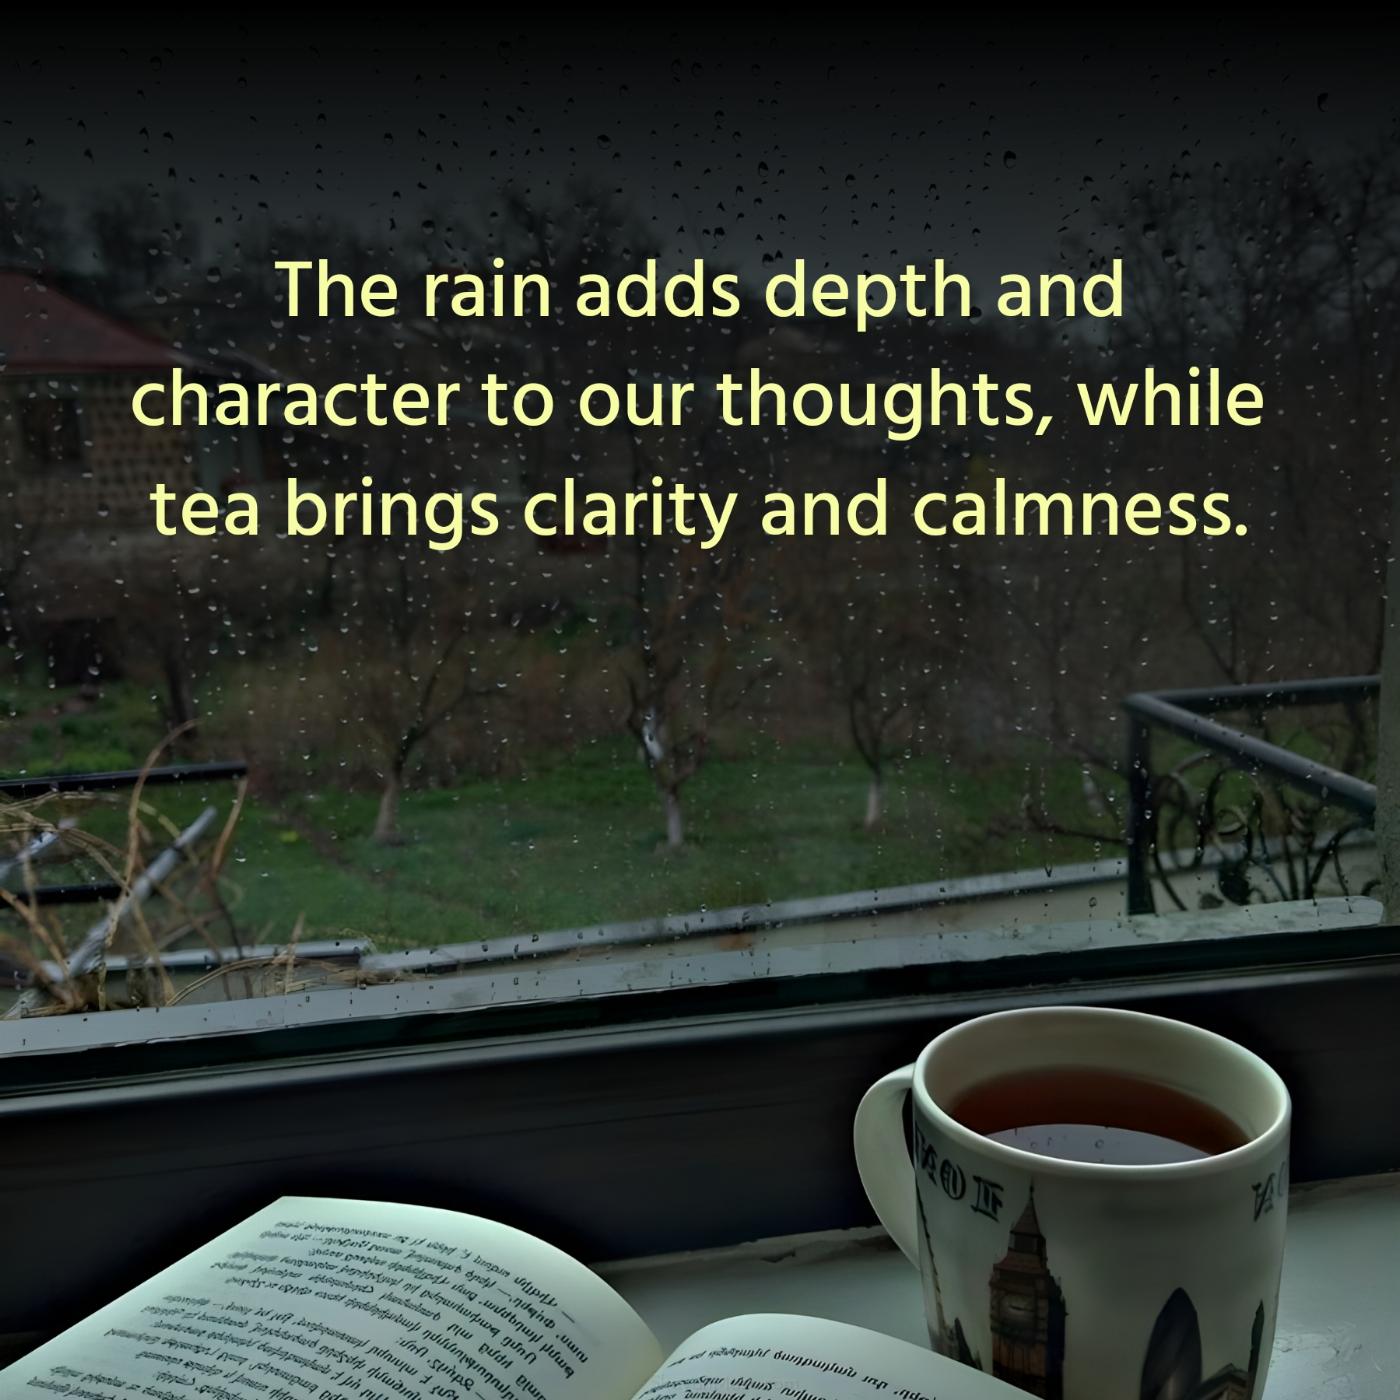 The rain adds depth and character to our thoughts